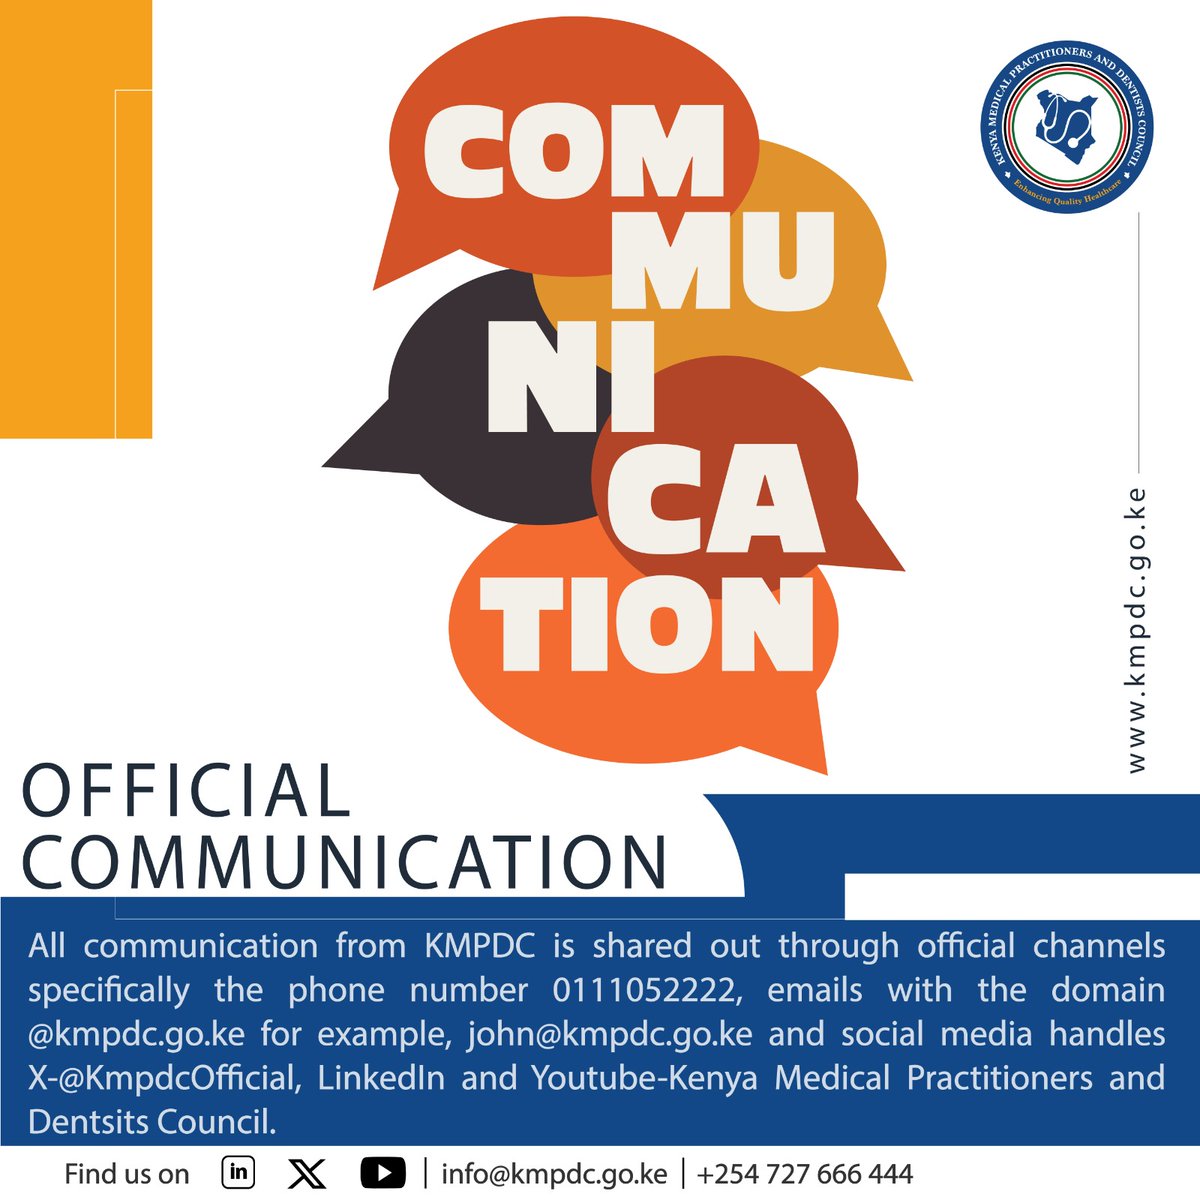 All communication from KMPDC is shared out through official channels specifically the phone number 0111052222, emails with the domain @kmpdc.go.ke for example, john@kmpdc.go.ke and social media handles X-@KmpdcOfficial, LinkedIn and Youtube-Kenya Medical Practitioners and